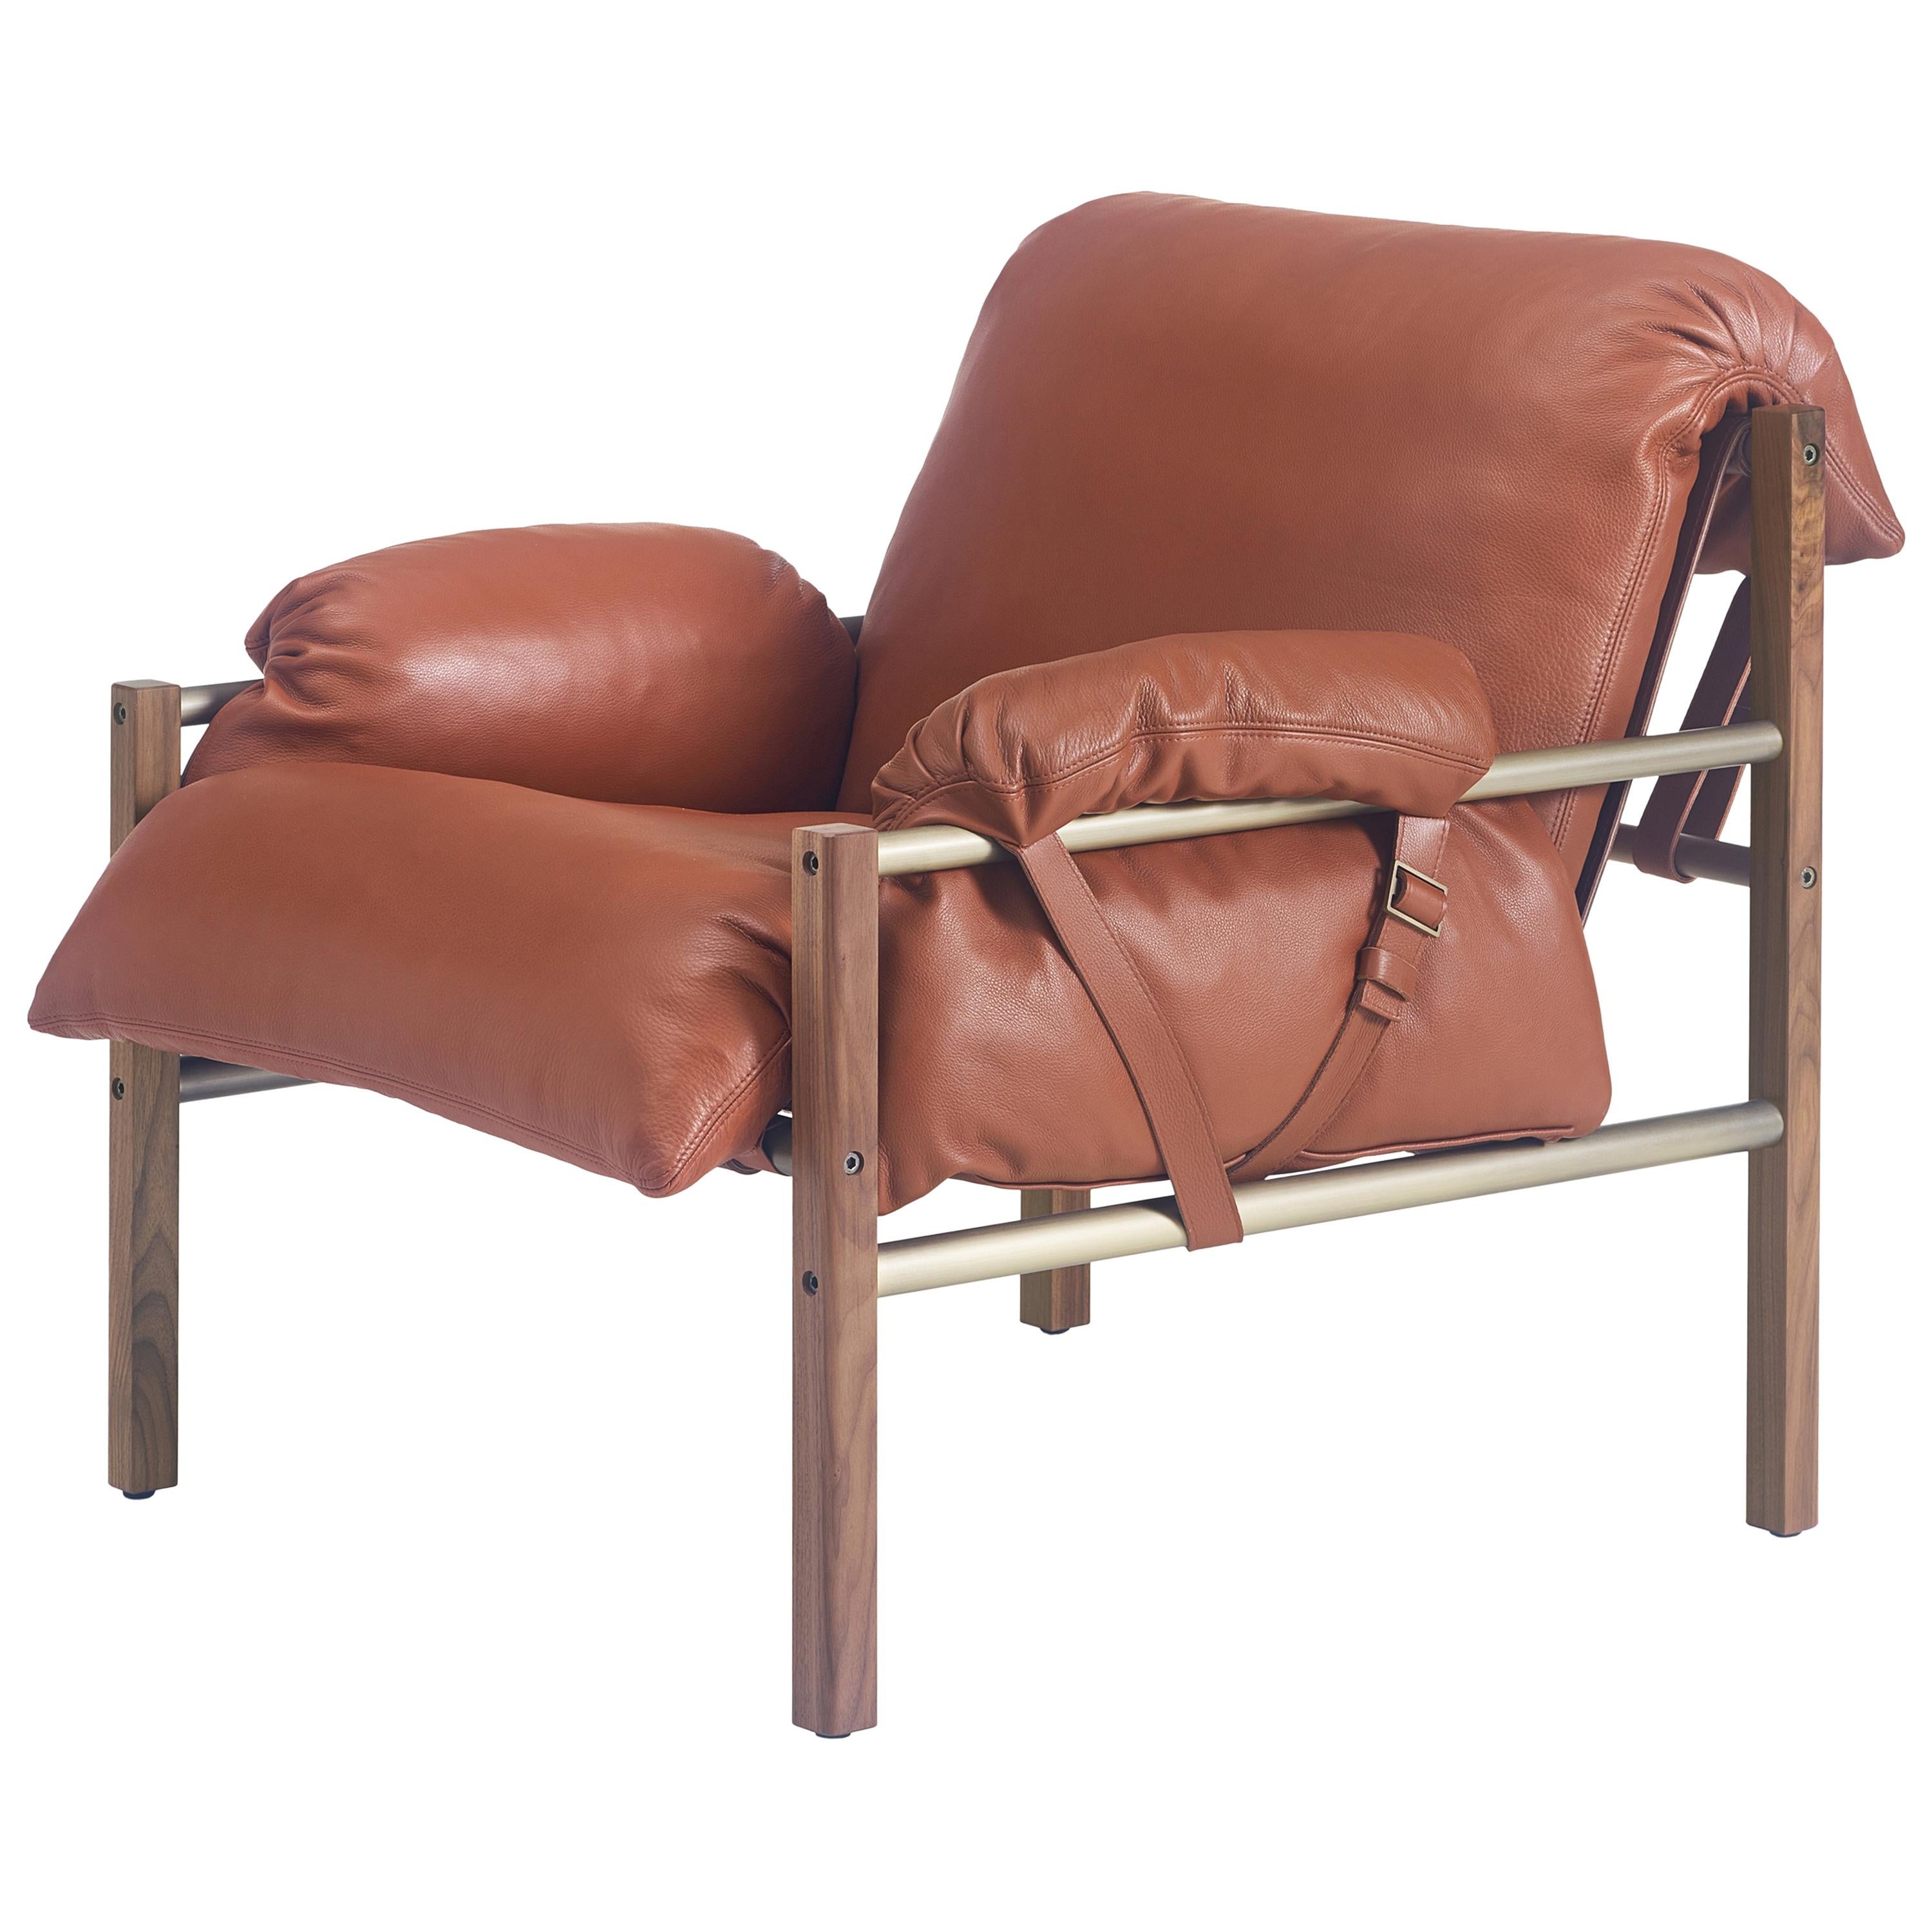 Sling Club Chair in Solid Walnut, Bronze and Leather Designed by Craig Bassam